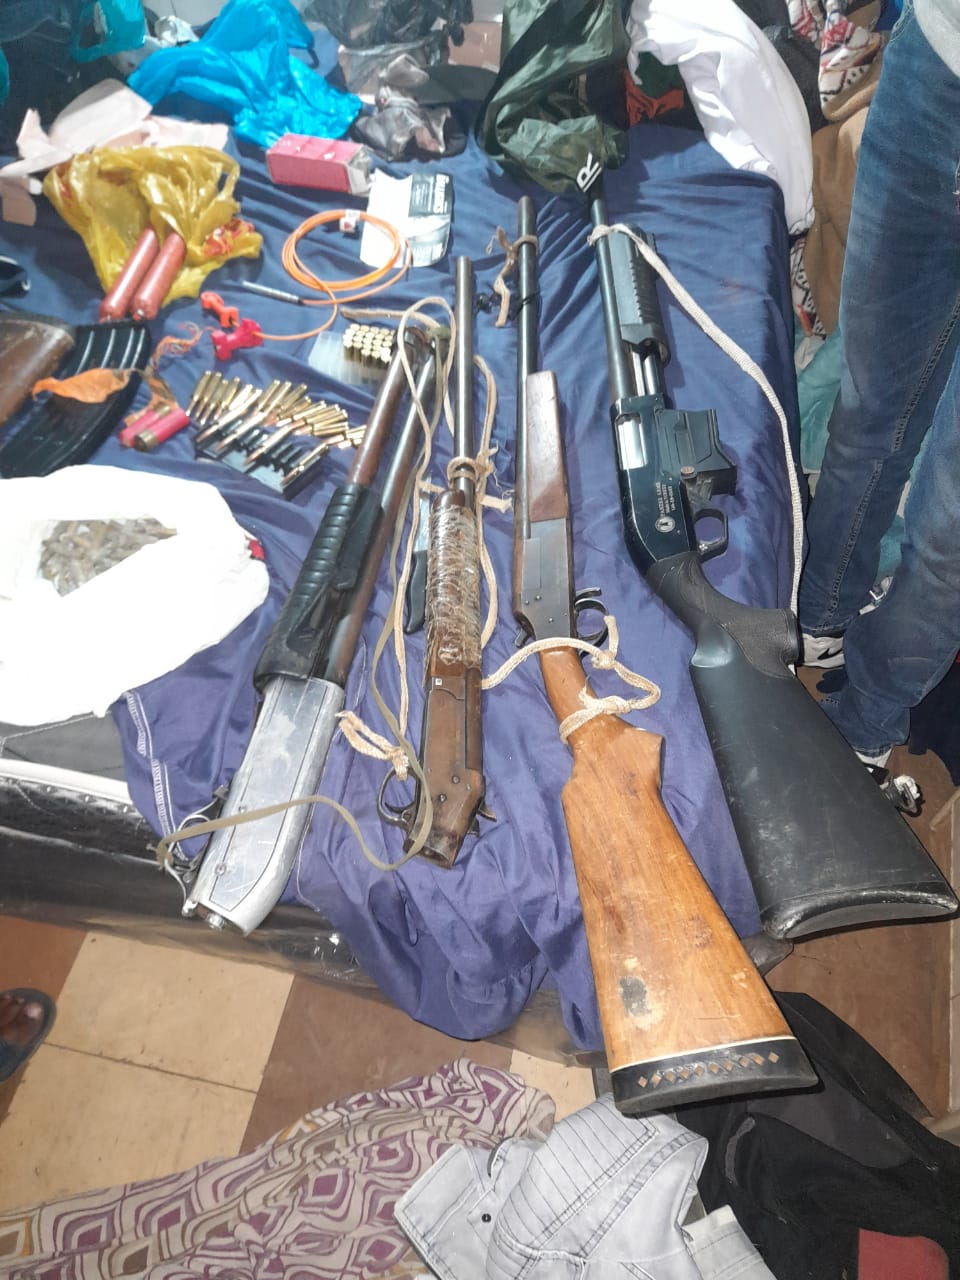 Accused to appear in court for illegal possession of firearms and ammunition